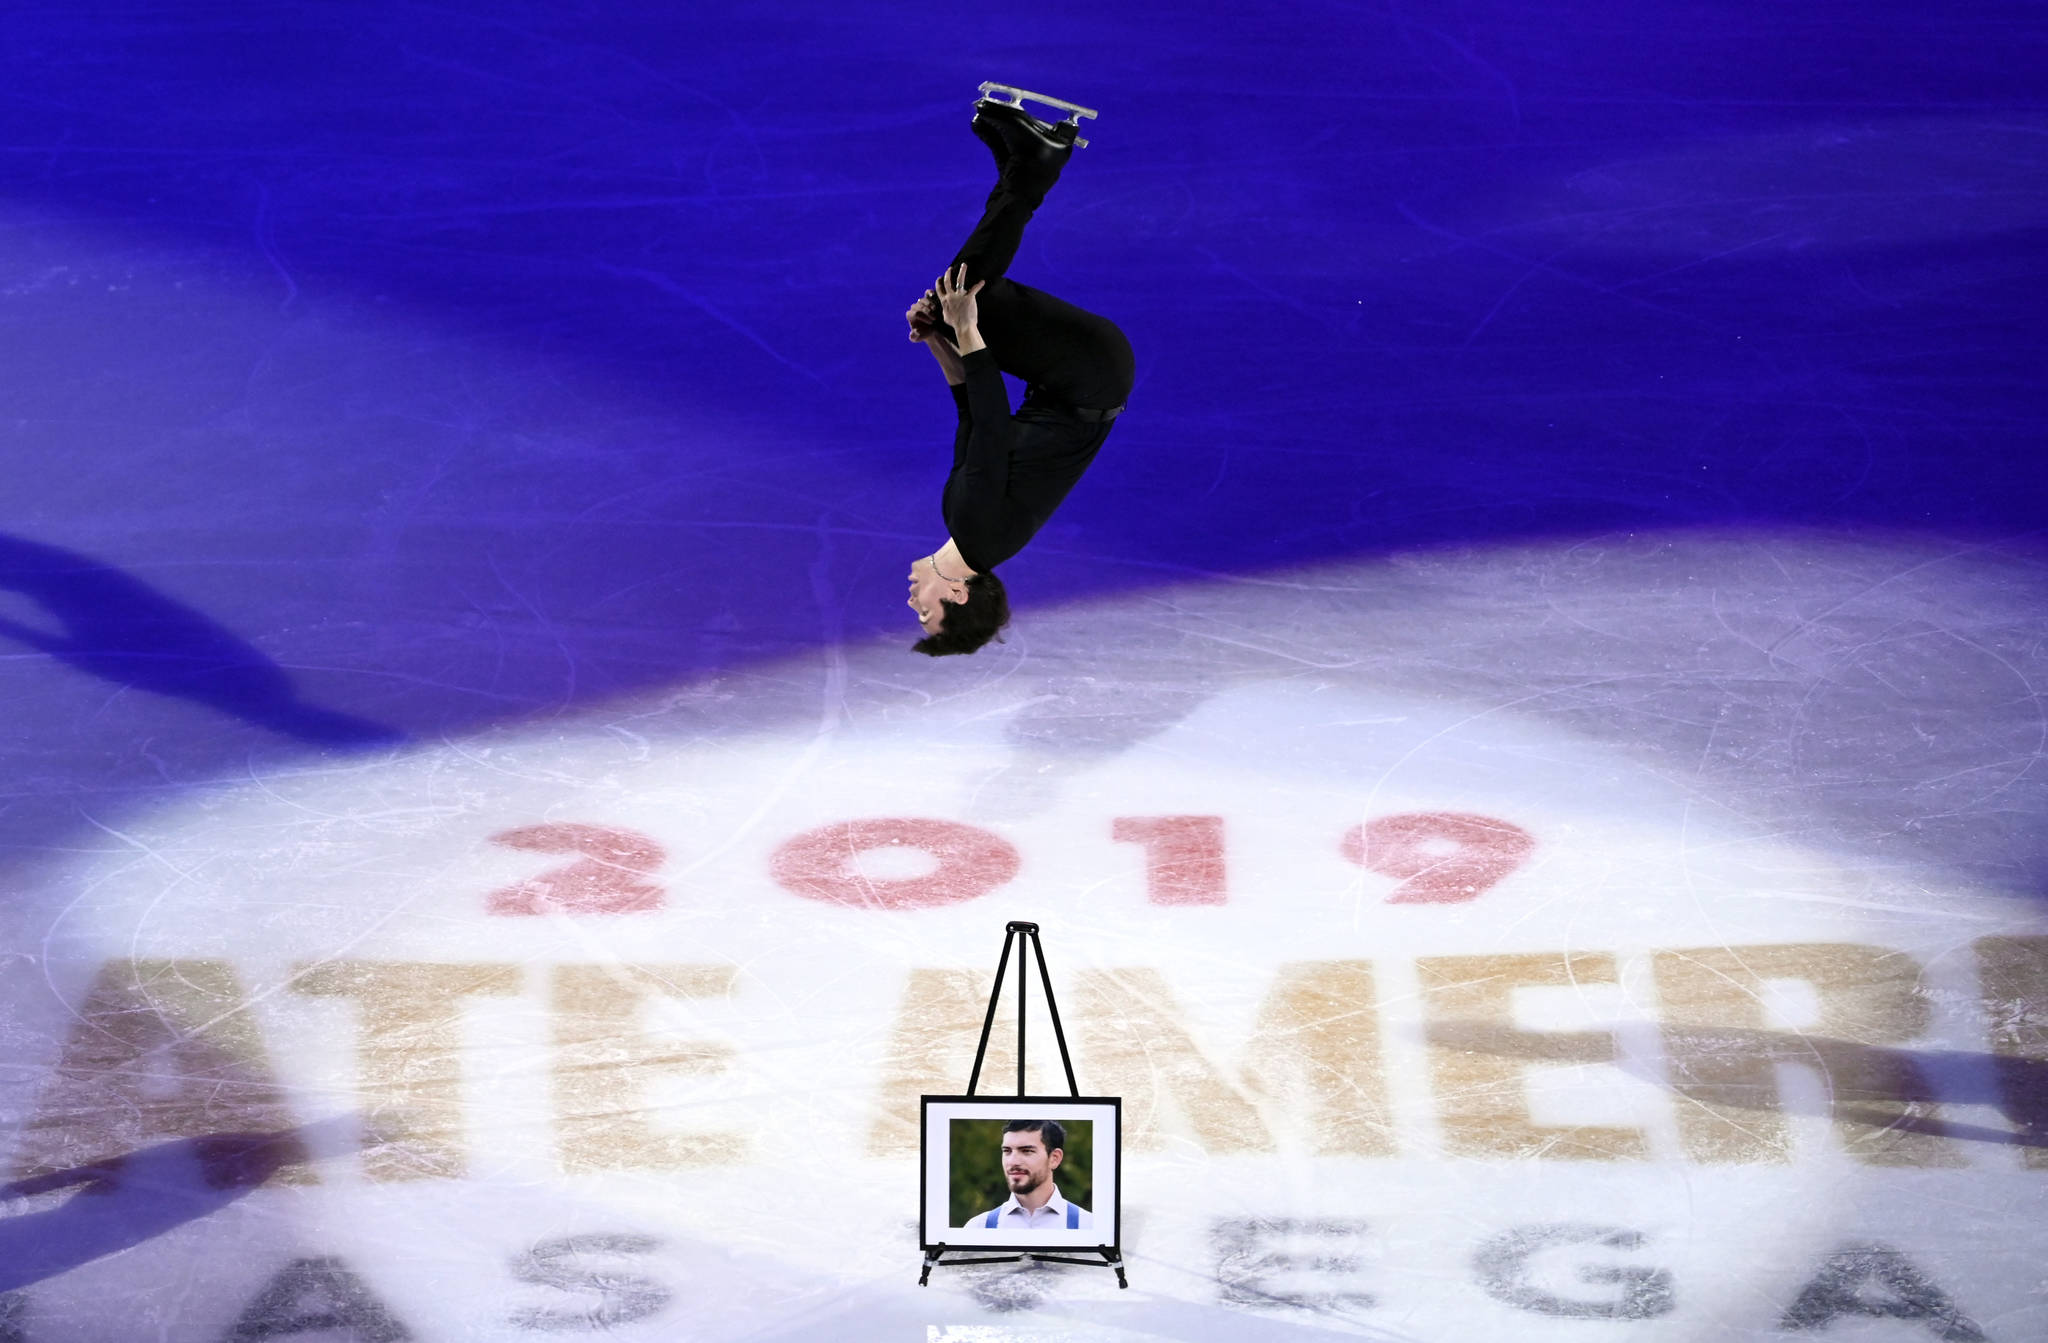 In this Oct. 20, 2019, file photo, Keegan Messing performs in honor of his late brother Paxon during the International Skating Union Grand Prix of Figure Skating Series exhibitio in Las Vegas. Messing has always skated with passion and showmanship. Whether he is channeling Charlie Chaplin, Gene Kelly or the Incredible Hulk, he is a storyteller capable of charming audiences from Fur Rendezvous to the Olympics. The 27-year-old has been skating since he was 3. (AP Photo | David Becker)